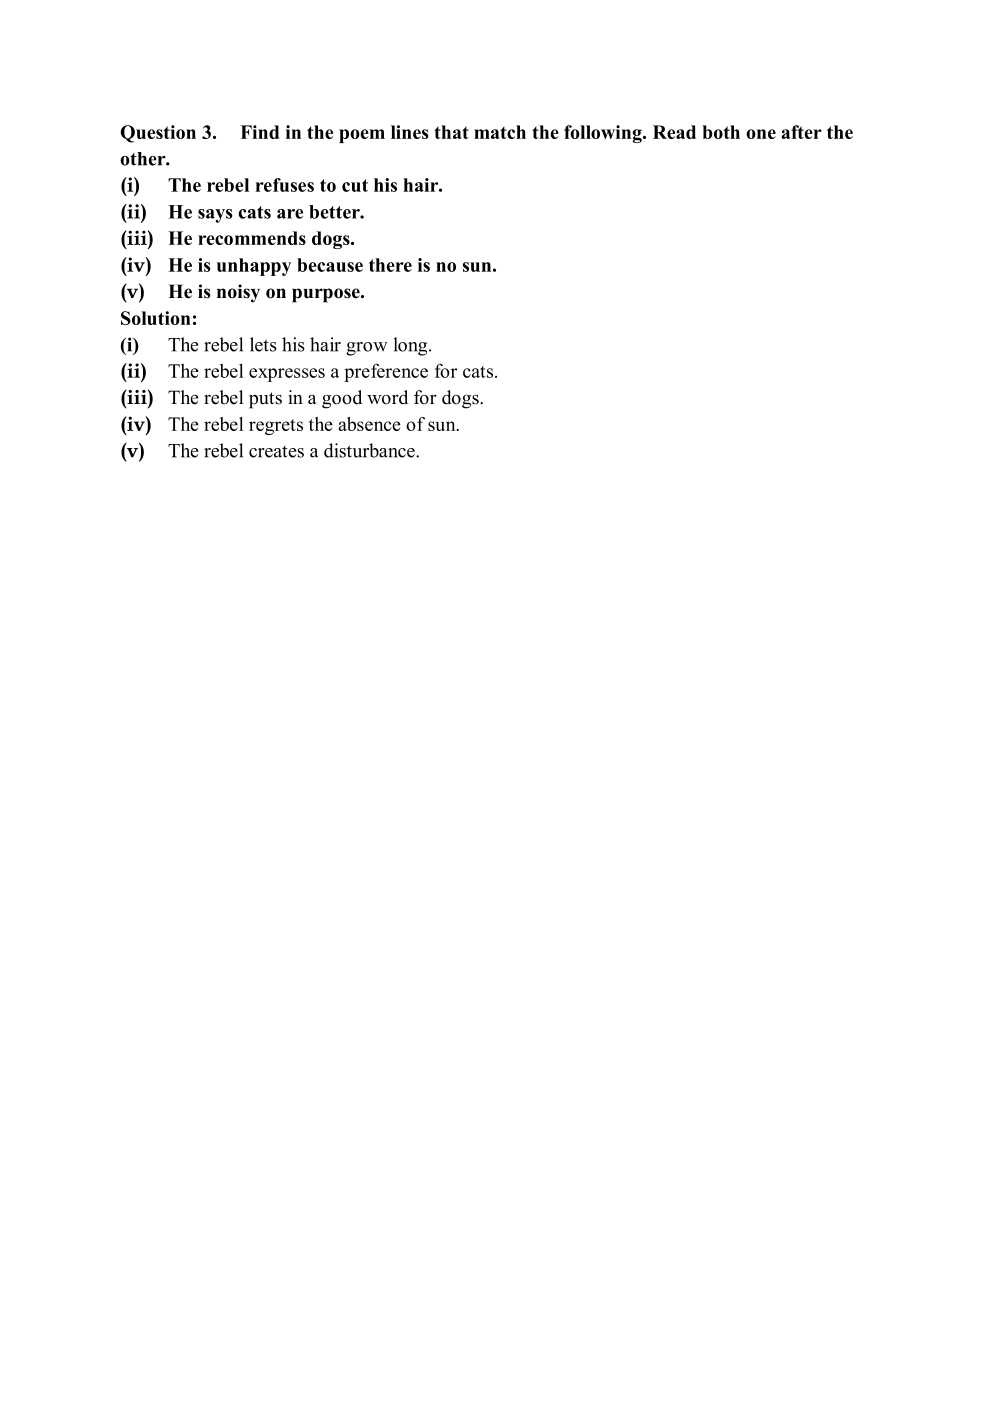 NCERT Solutions For Class 7 English Honeycomb Poem Chapter 2 The Rebel